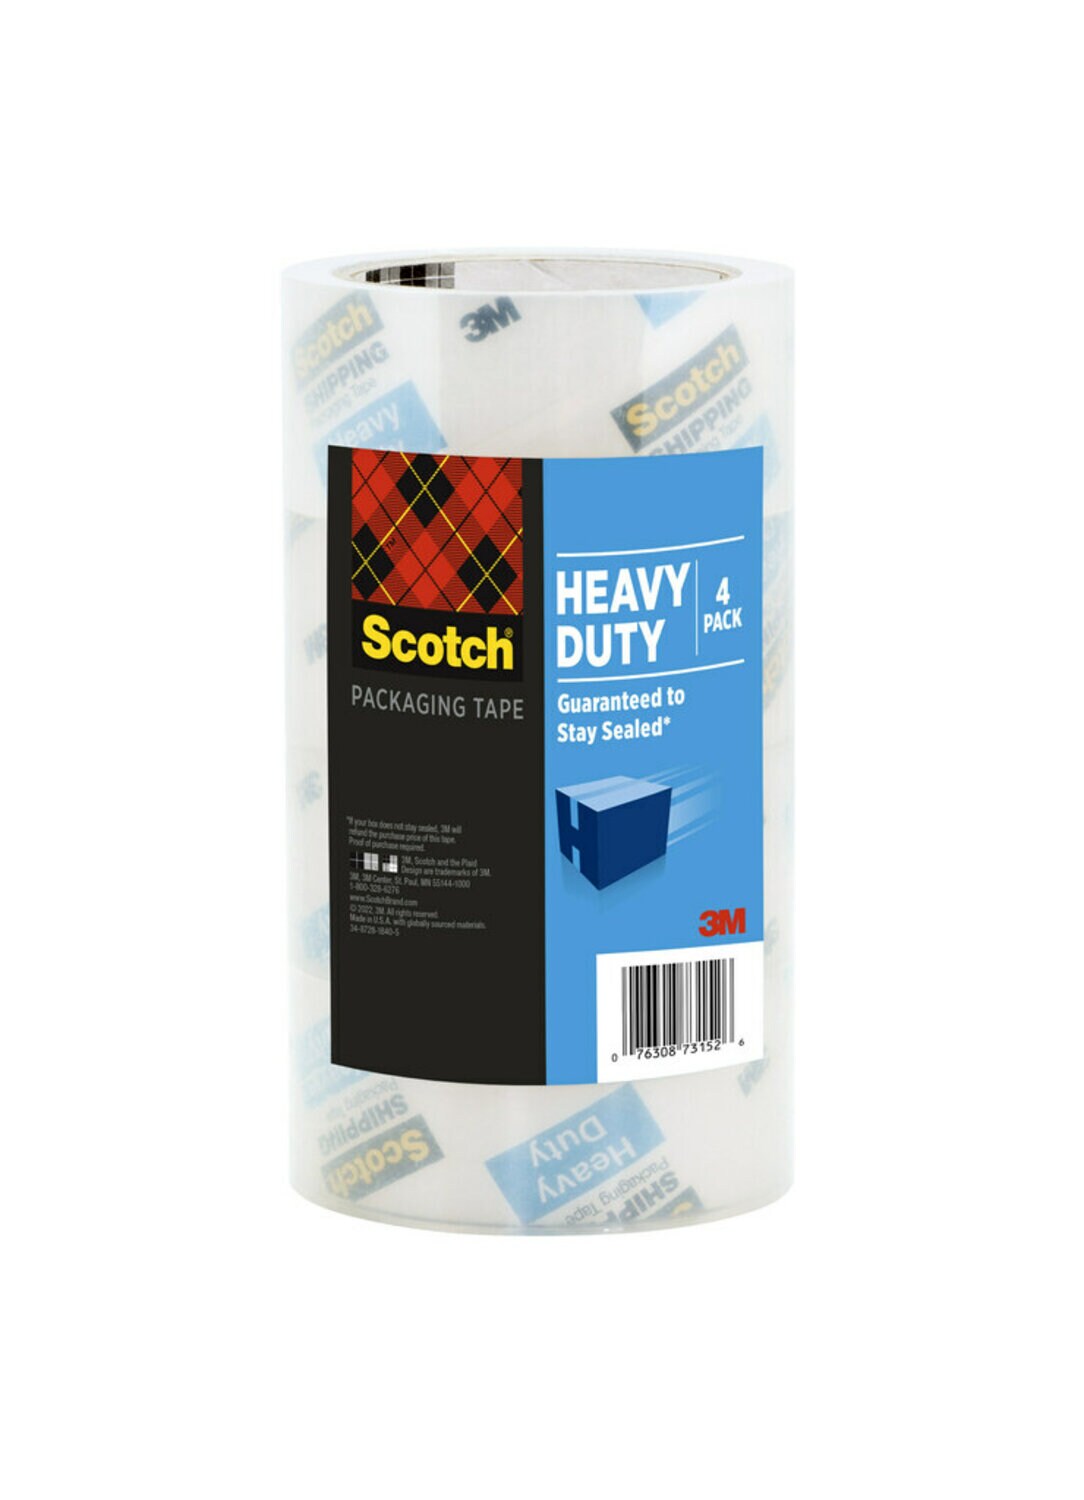 7100276433 - Scotch Heavy Duty Shipping Packaging Tape 3850-40LR4-4GC,1.88 in x 43.7 yd (48 mm x 40 m), 4 Pack